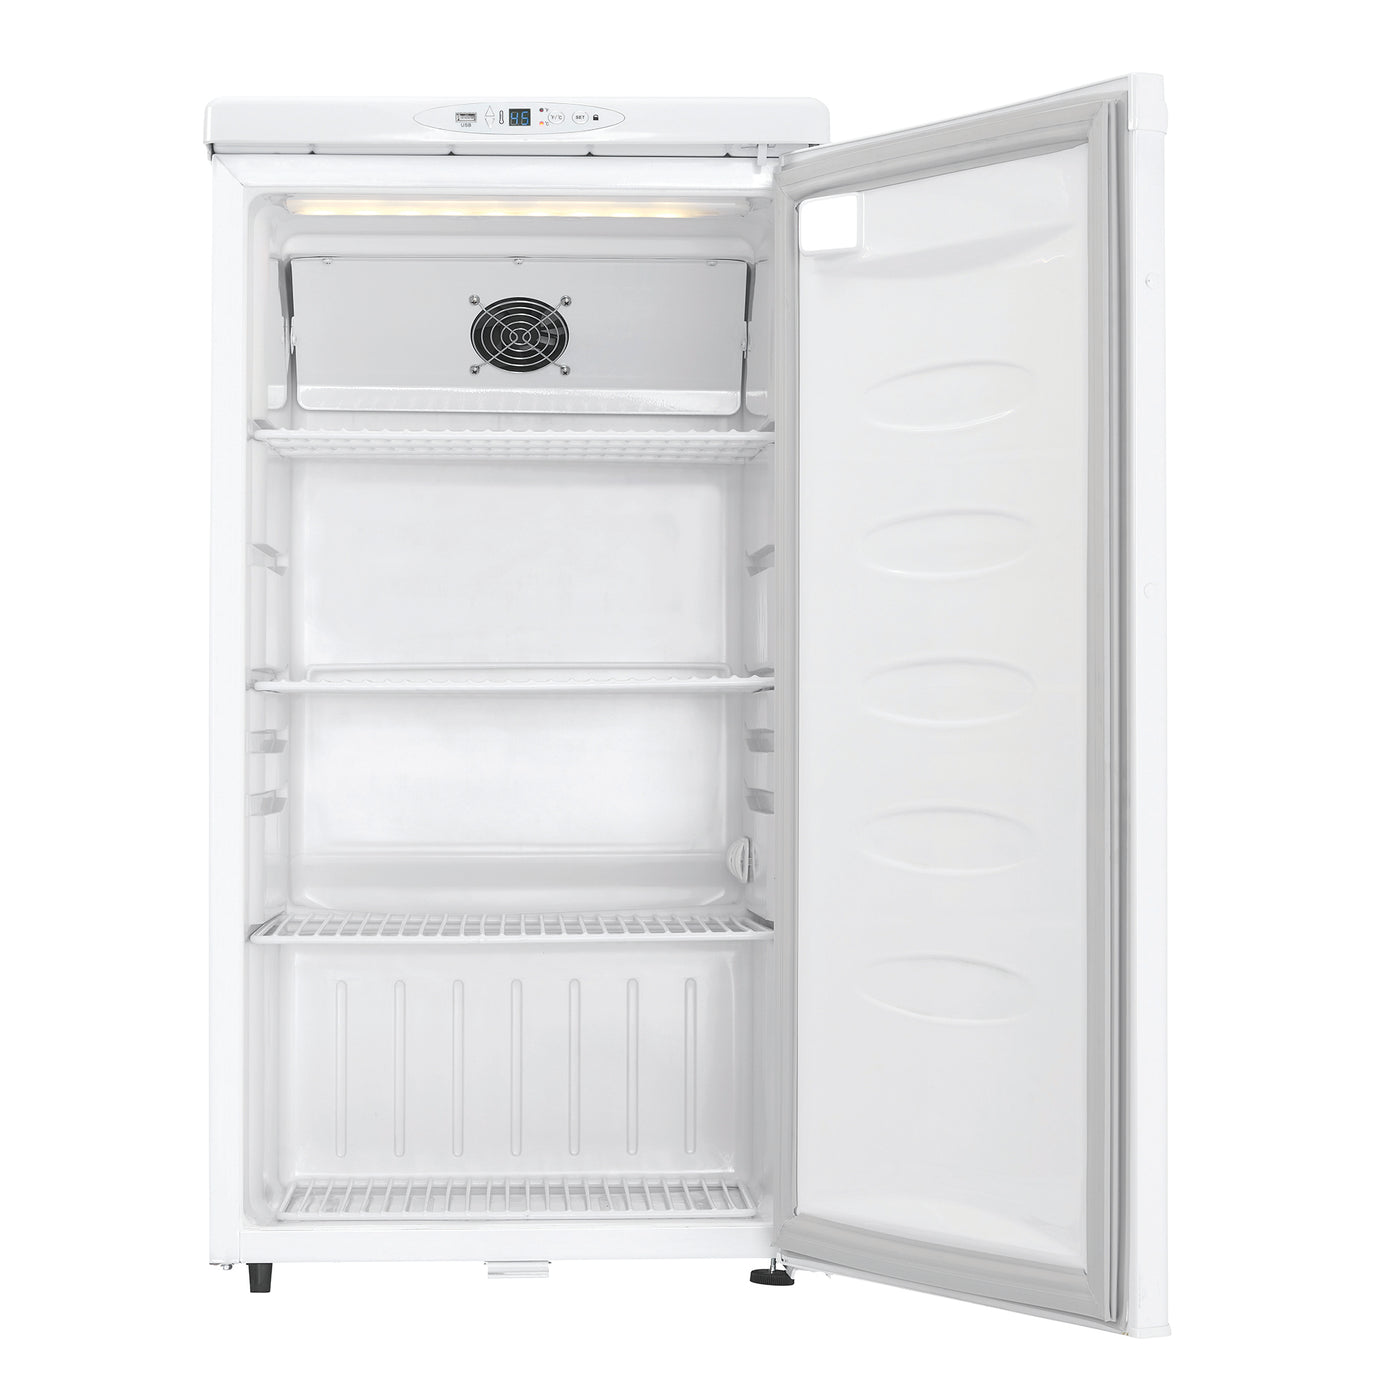 Danby White Health Compact Refrigerator (3.2 Cu. Ft.) - DH032A1W-1